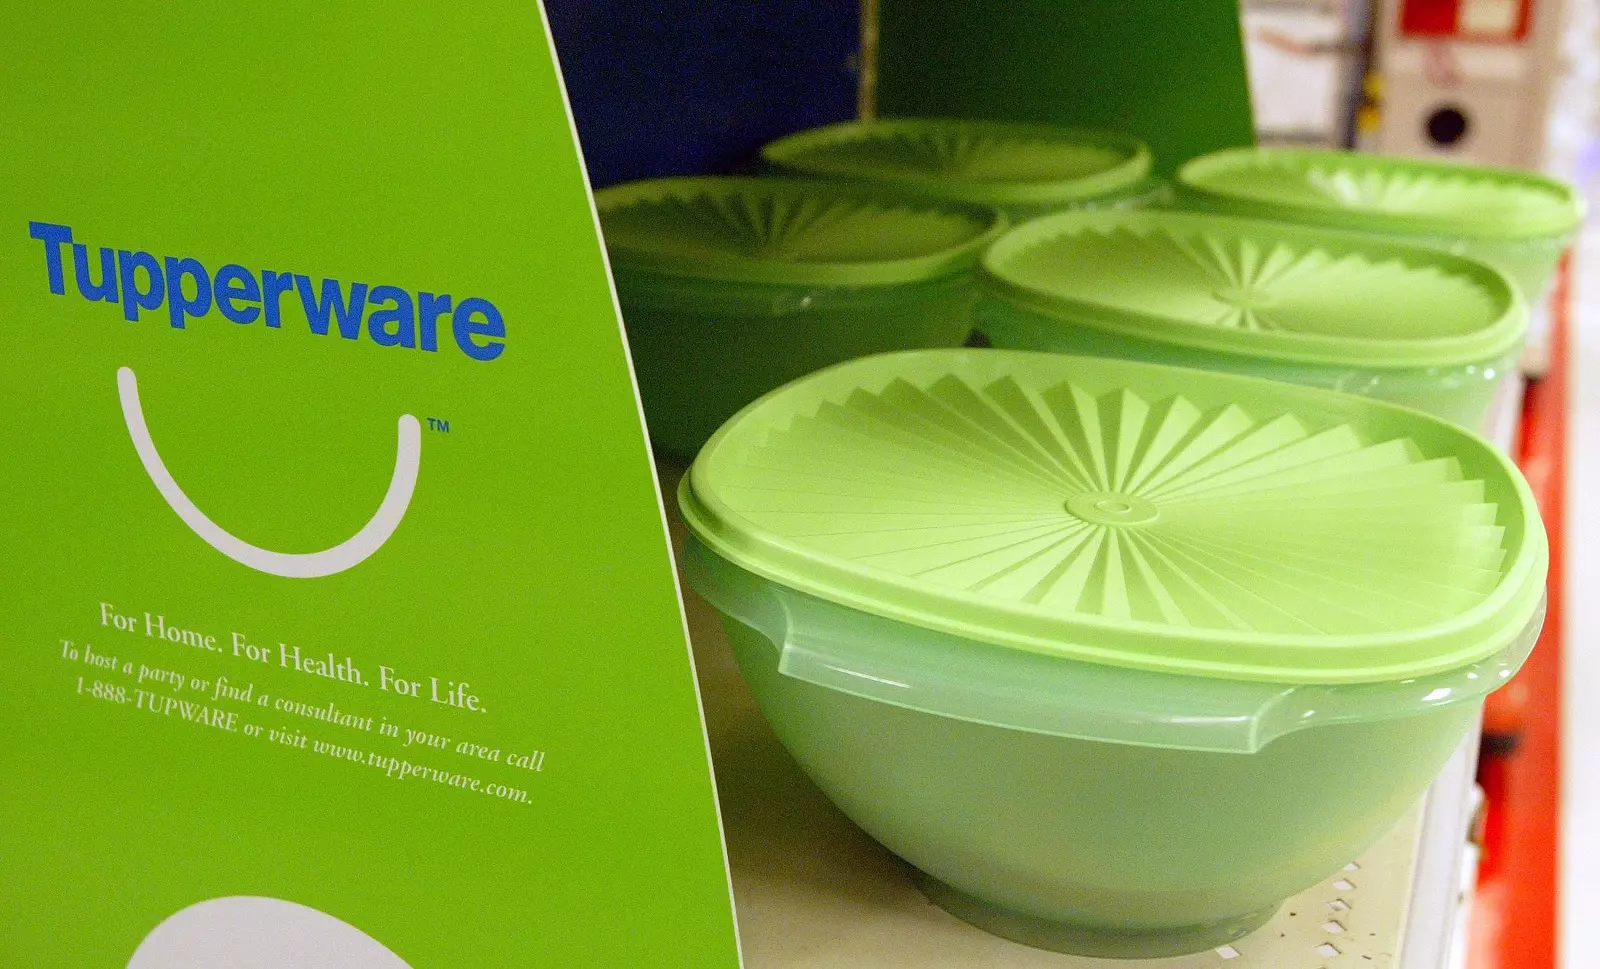 Tupperware Now Available at Your Favorite Department Store